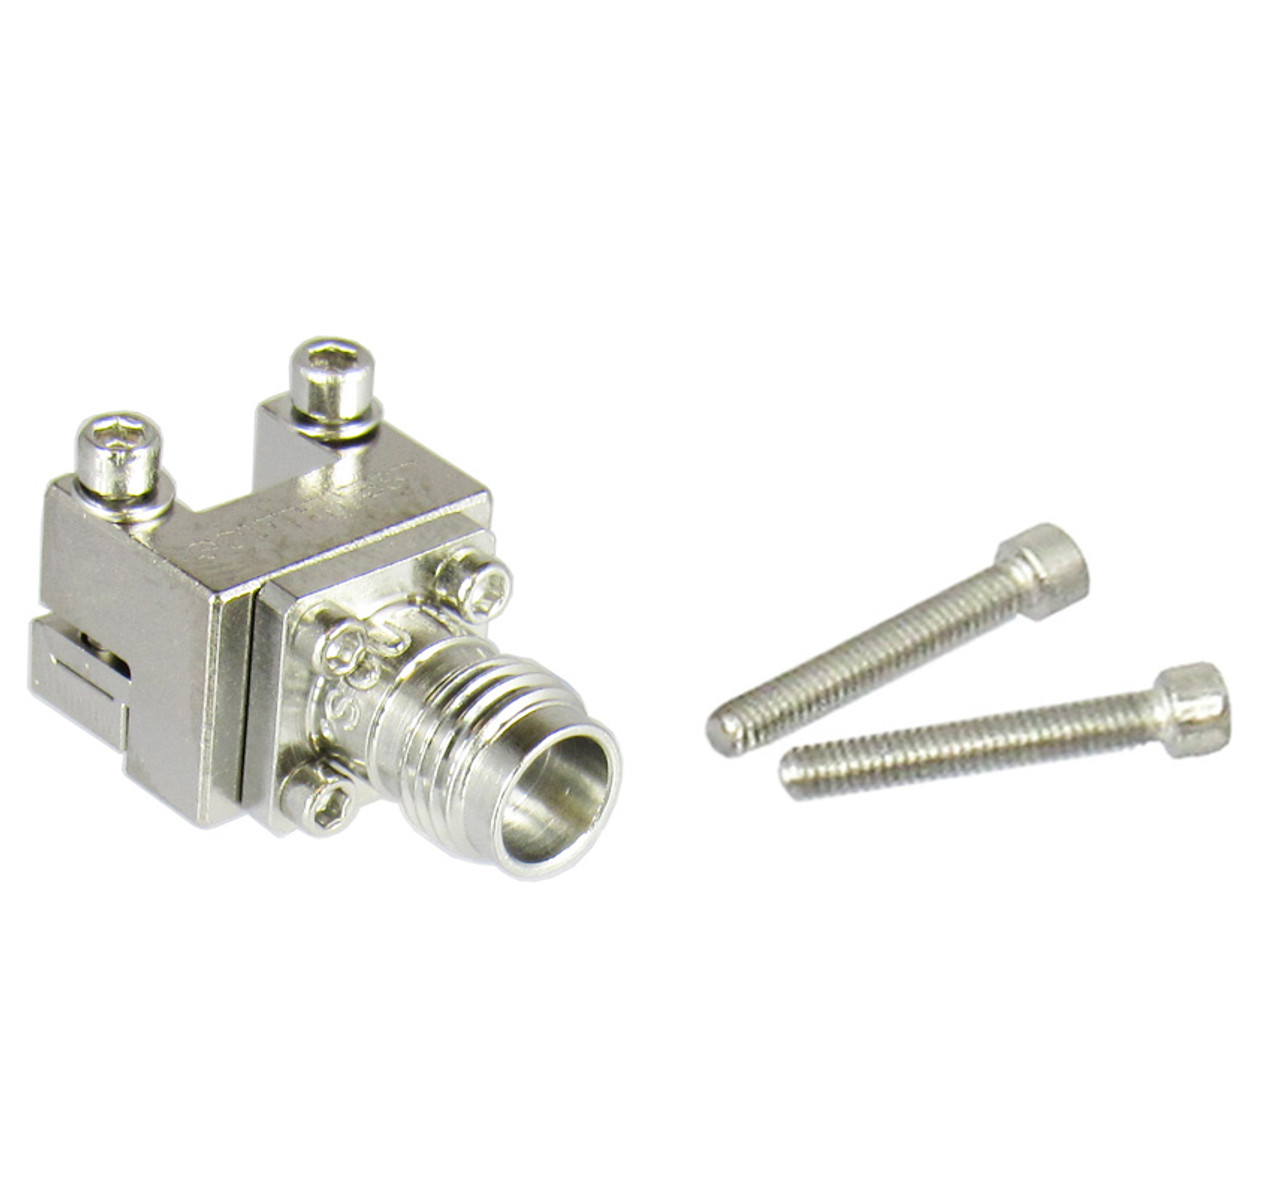 1492-02A-5 2.4/Female End Launch Connector for .01 Pin and .0635 Dielectric Centric RF